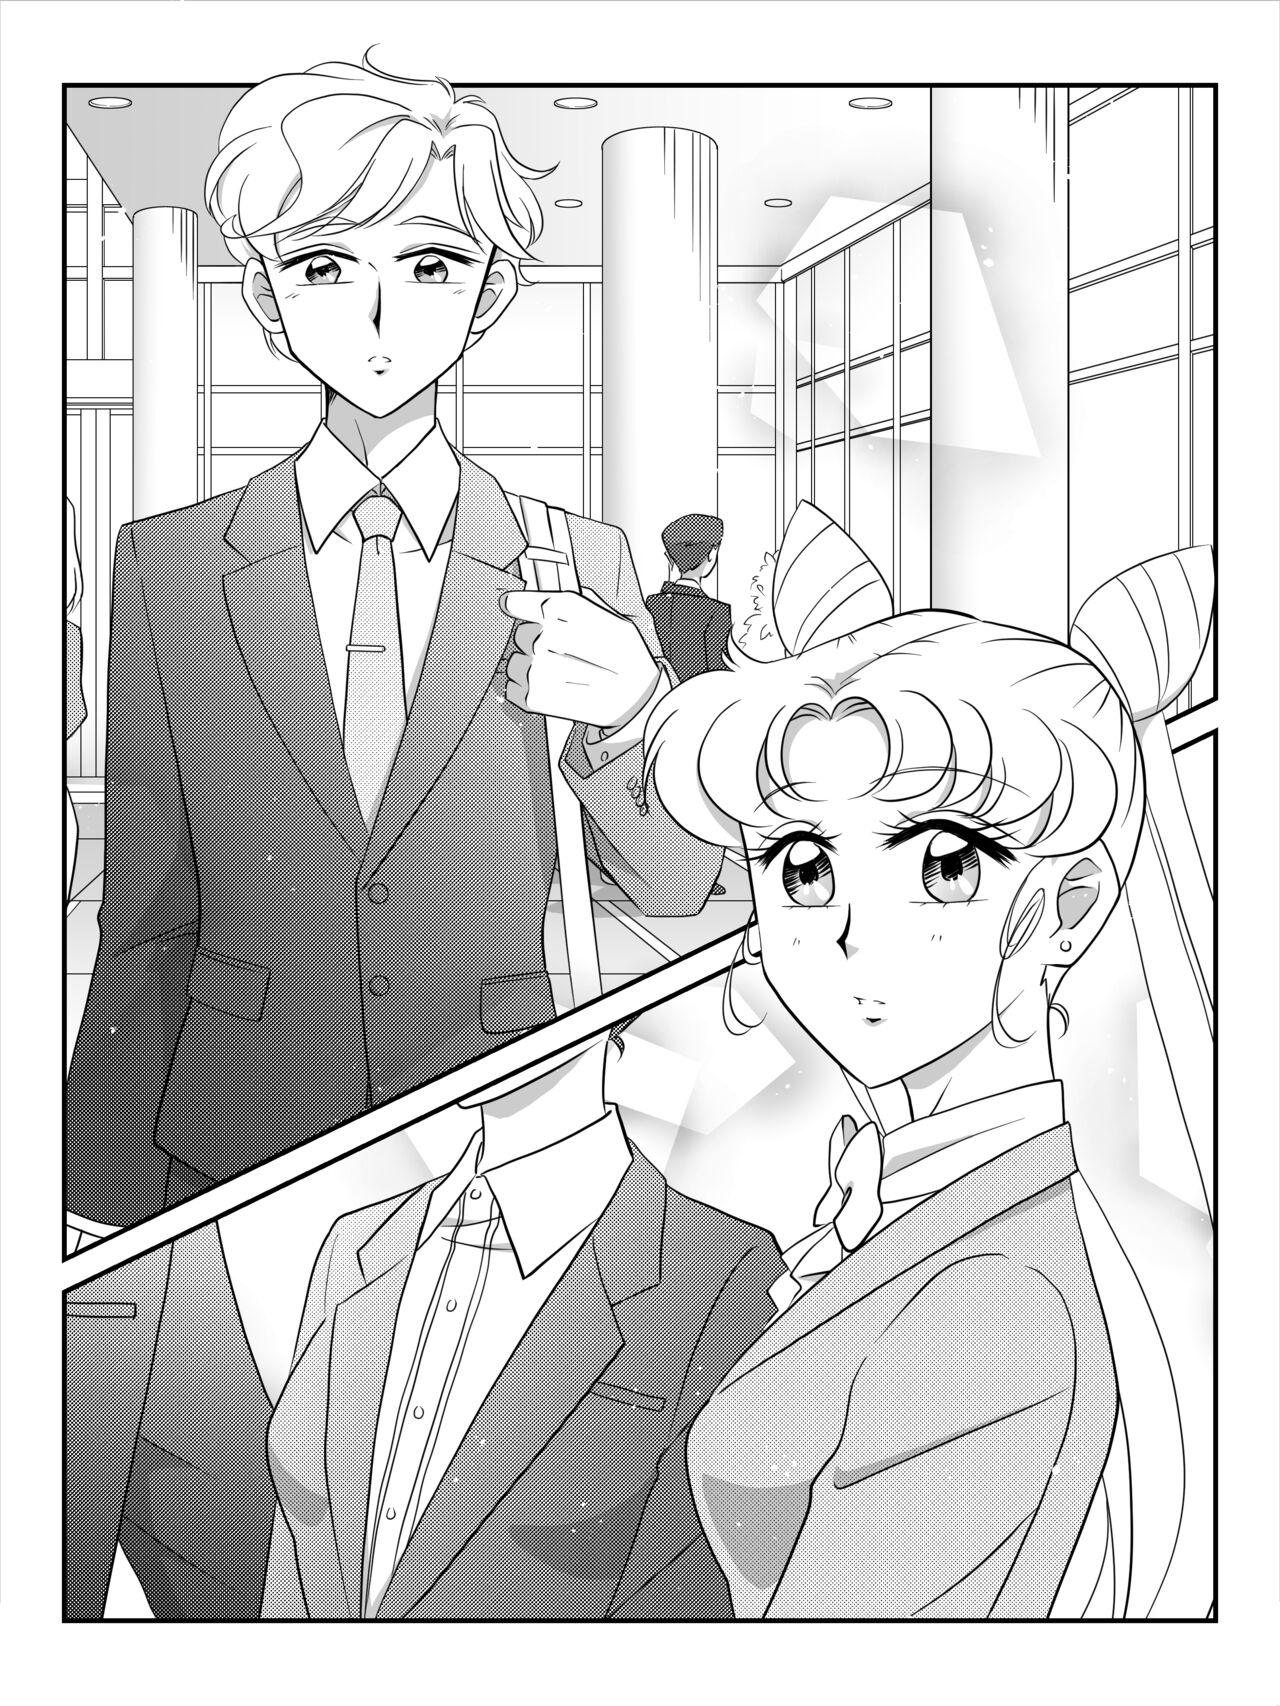 Blowjobs (Night of Gales Night of Gales][my new rebort is my boss's daughter (Bishoujo Senshi Sailor Moon) - Sailor moon | bishoujo senshi sailor moon Voyeursex - Page 3